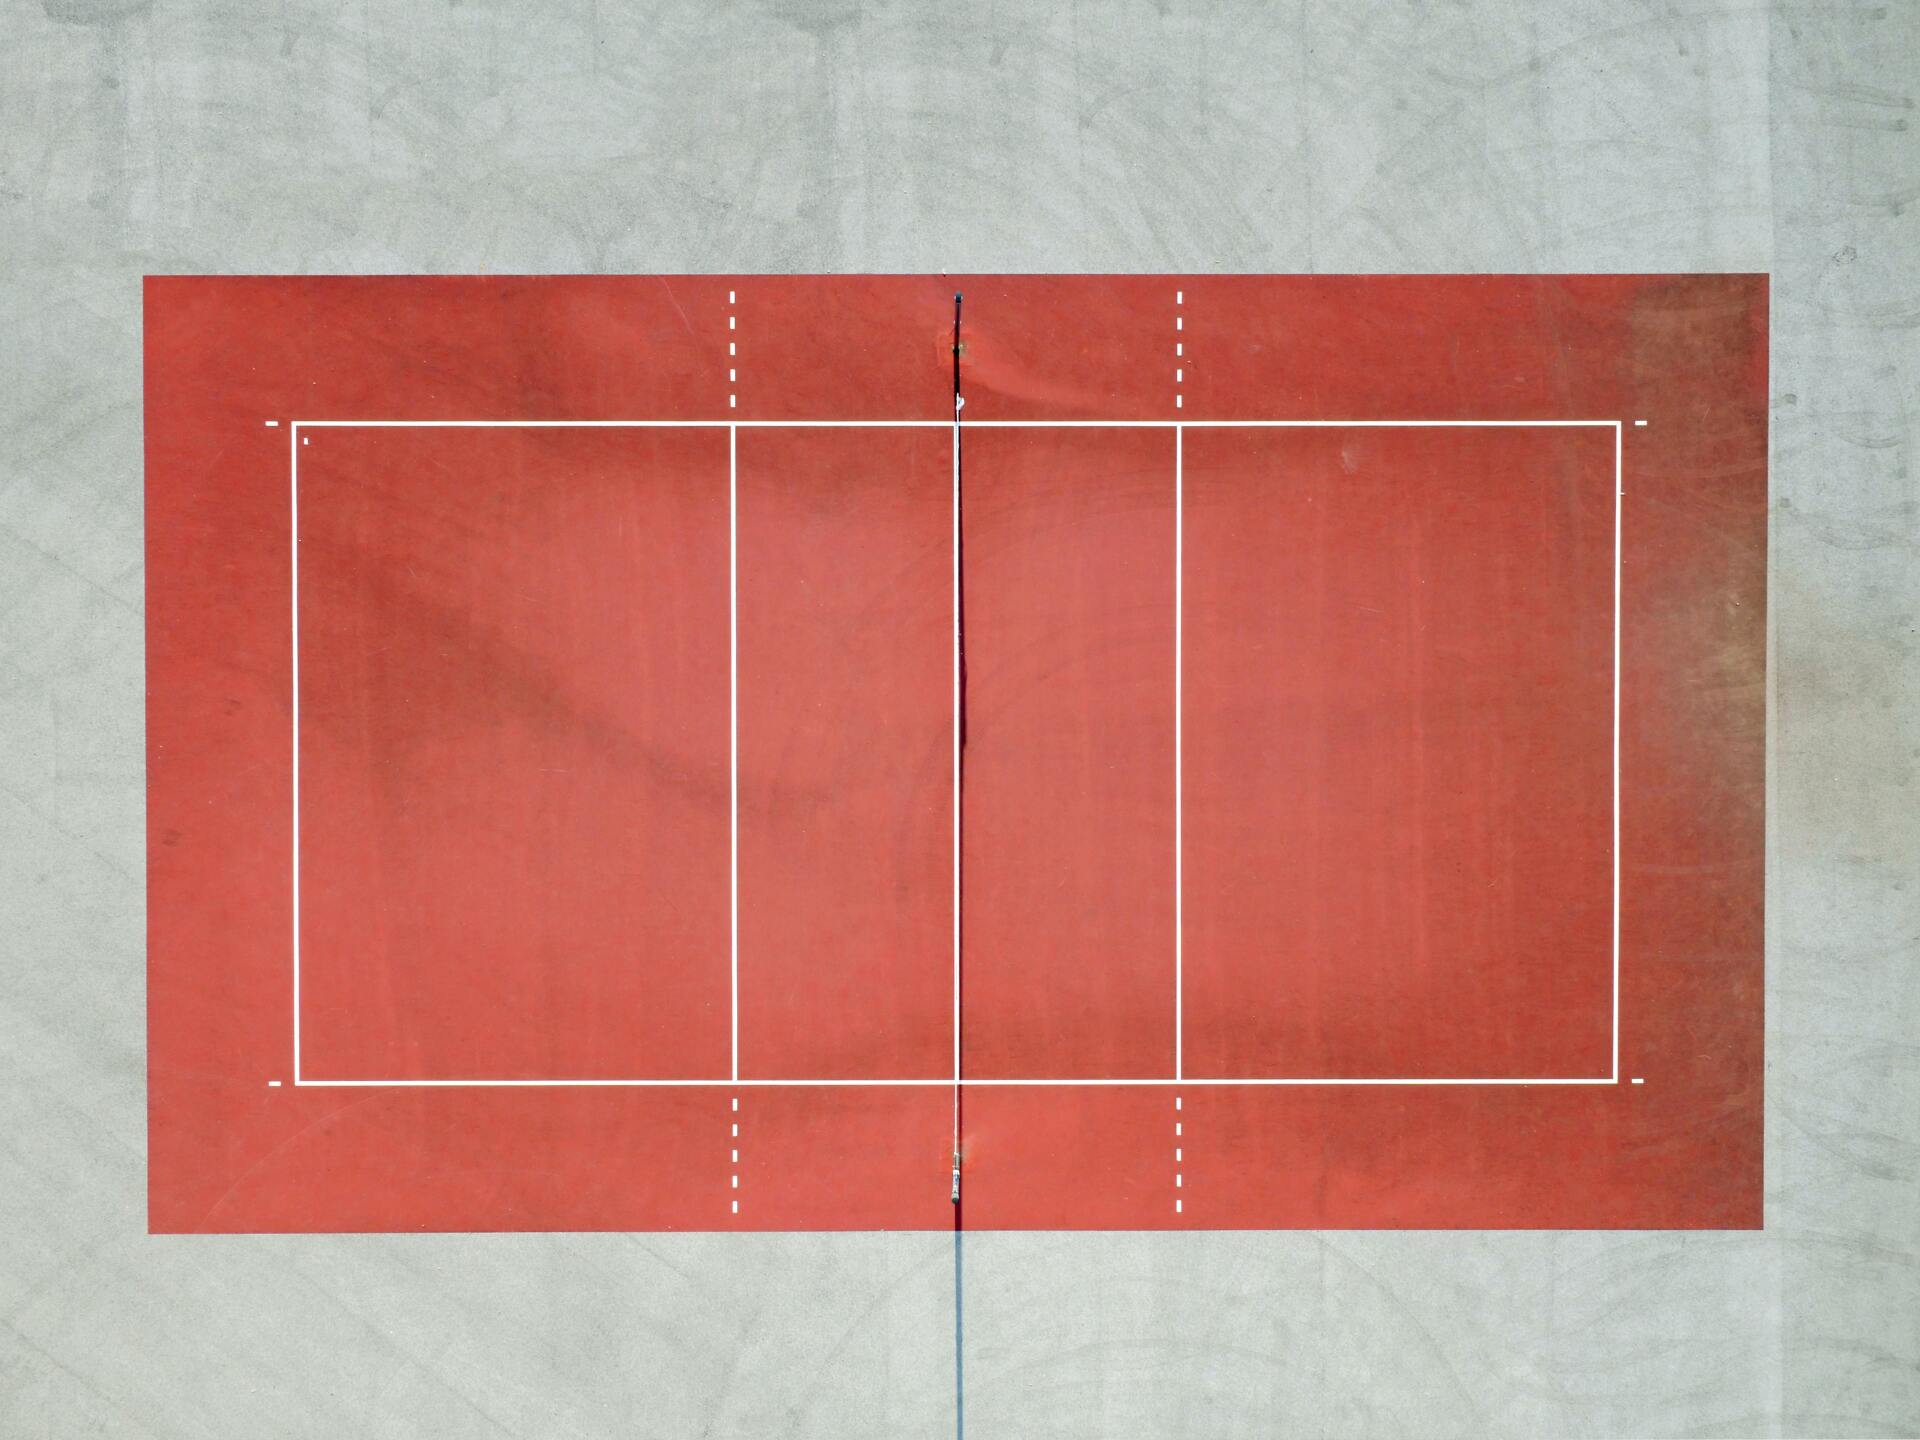 An empty clay tennis court from above